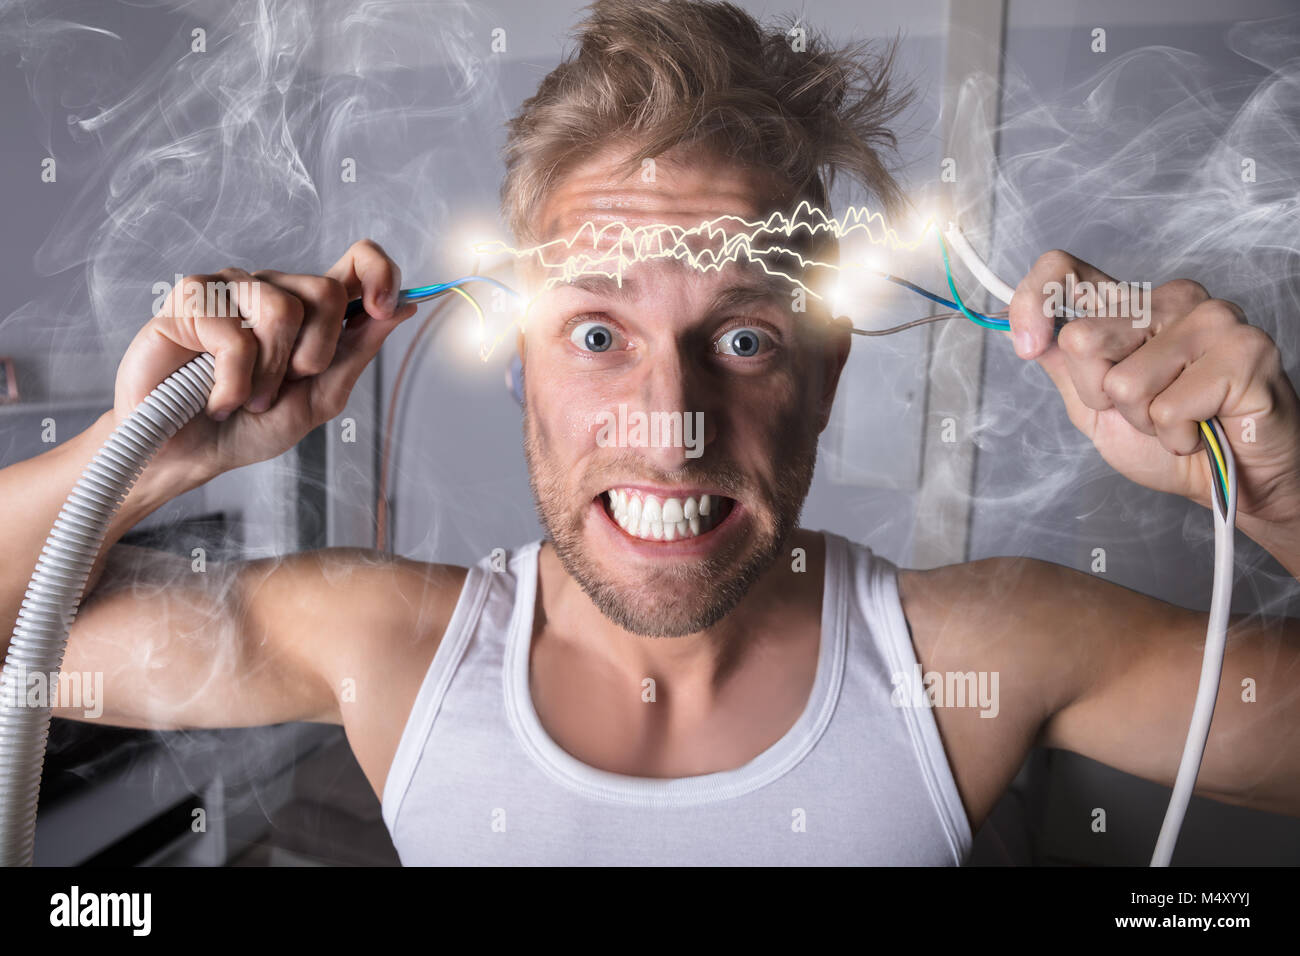 Portrait Of A Man Holding Bared Wires And Screaming Of Pain Stock Photo